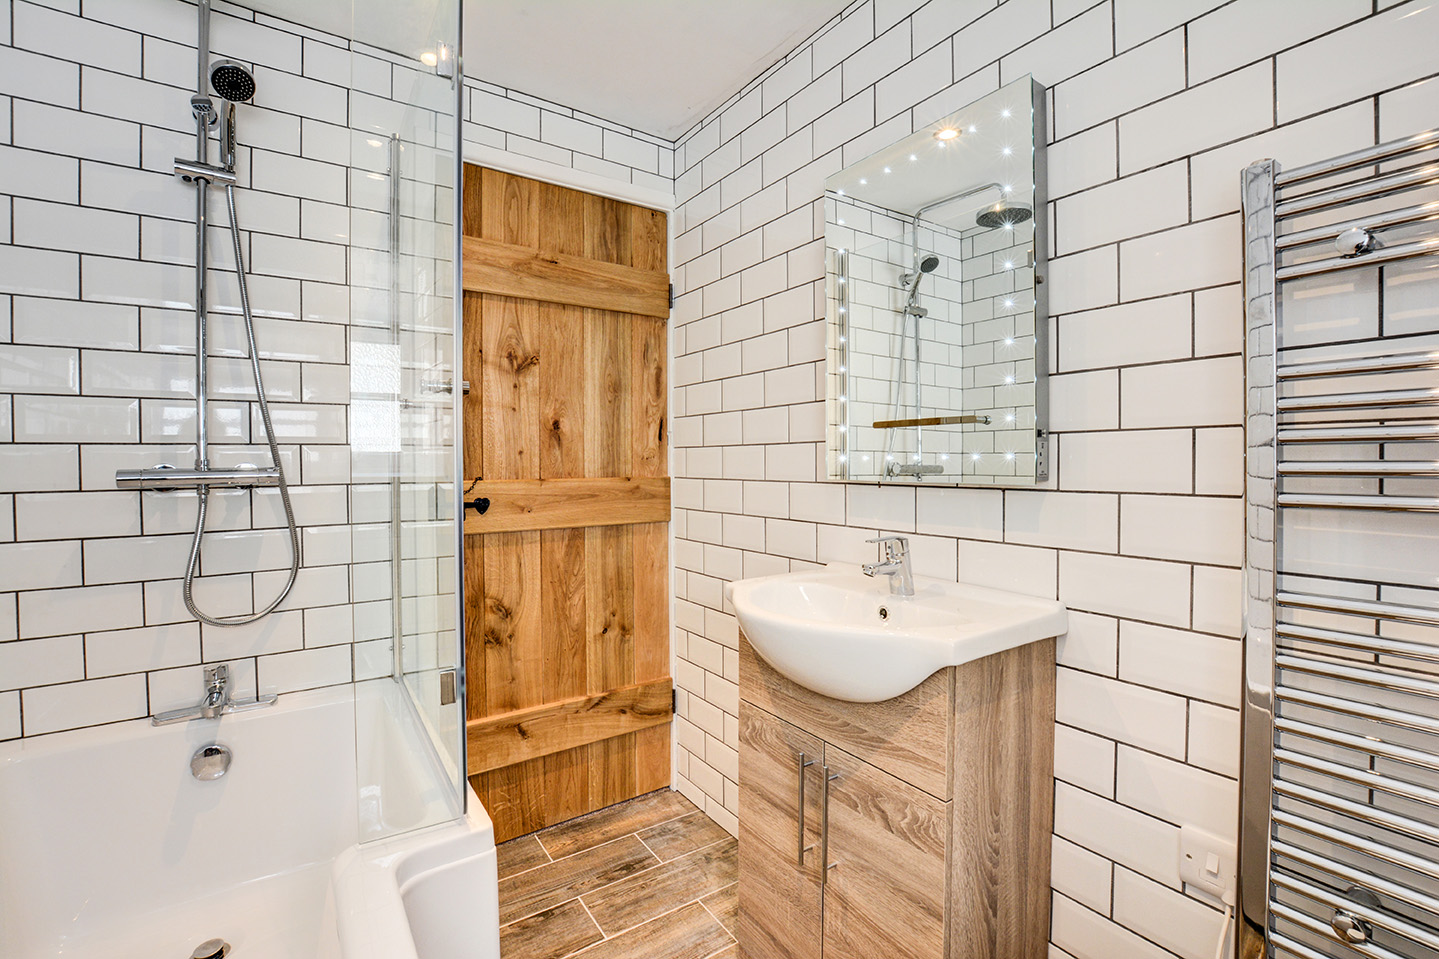 The bathroom at Jingles luxury self catering holiday cottage at Penrose Burden in North Cornwall near Bodmin Moor01.jpg